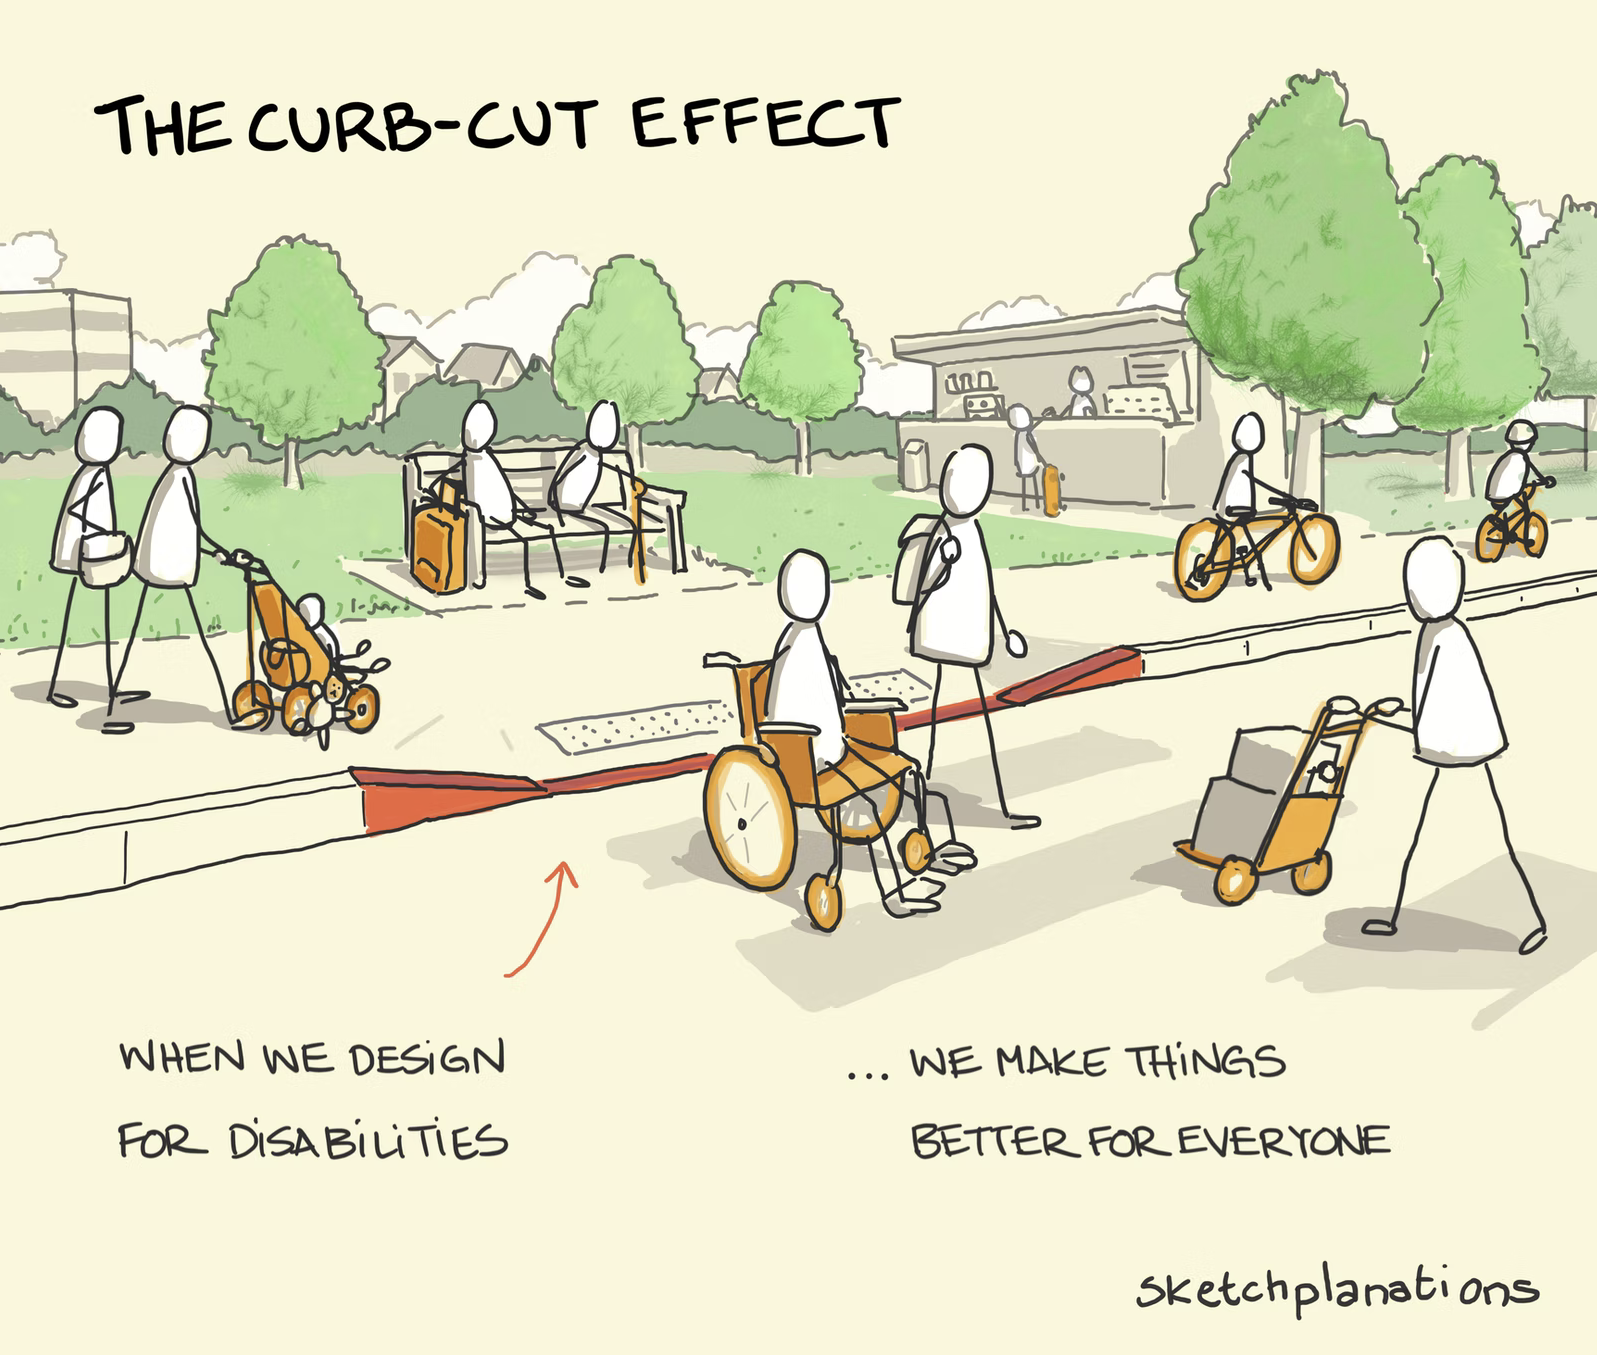 A sketch of stick figers using wheel chair curb cuts in different ways, like someone with a stroller, bycicle, and wheeling a fork lift.